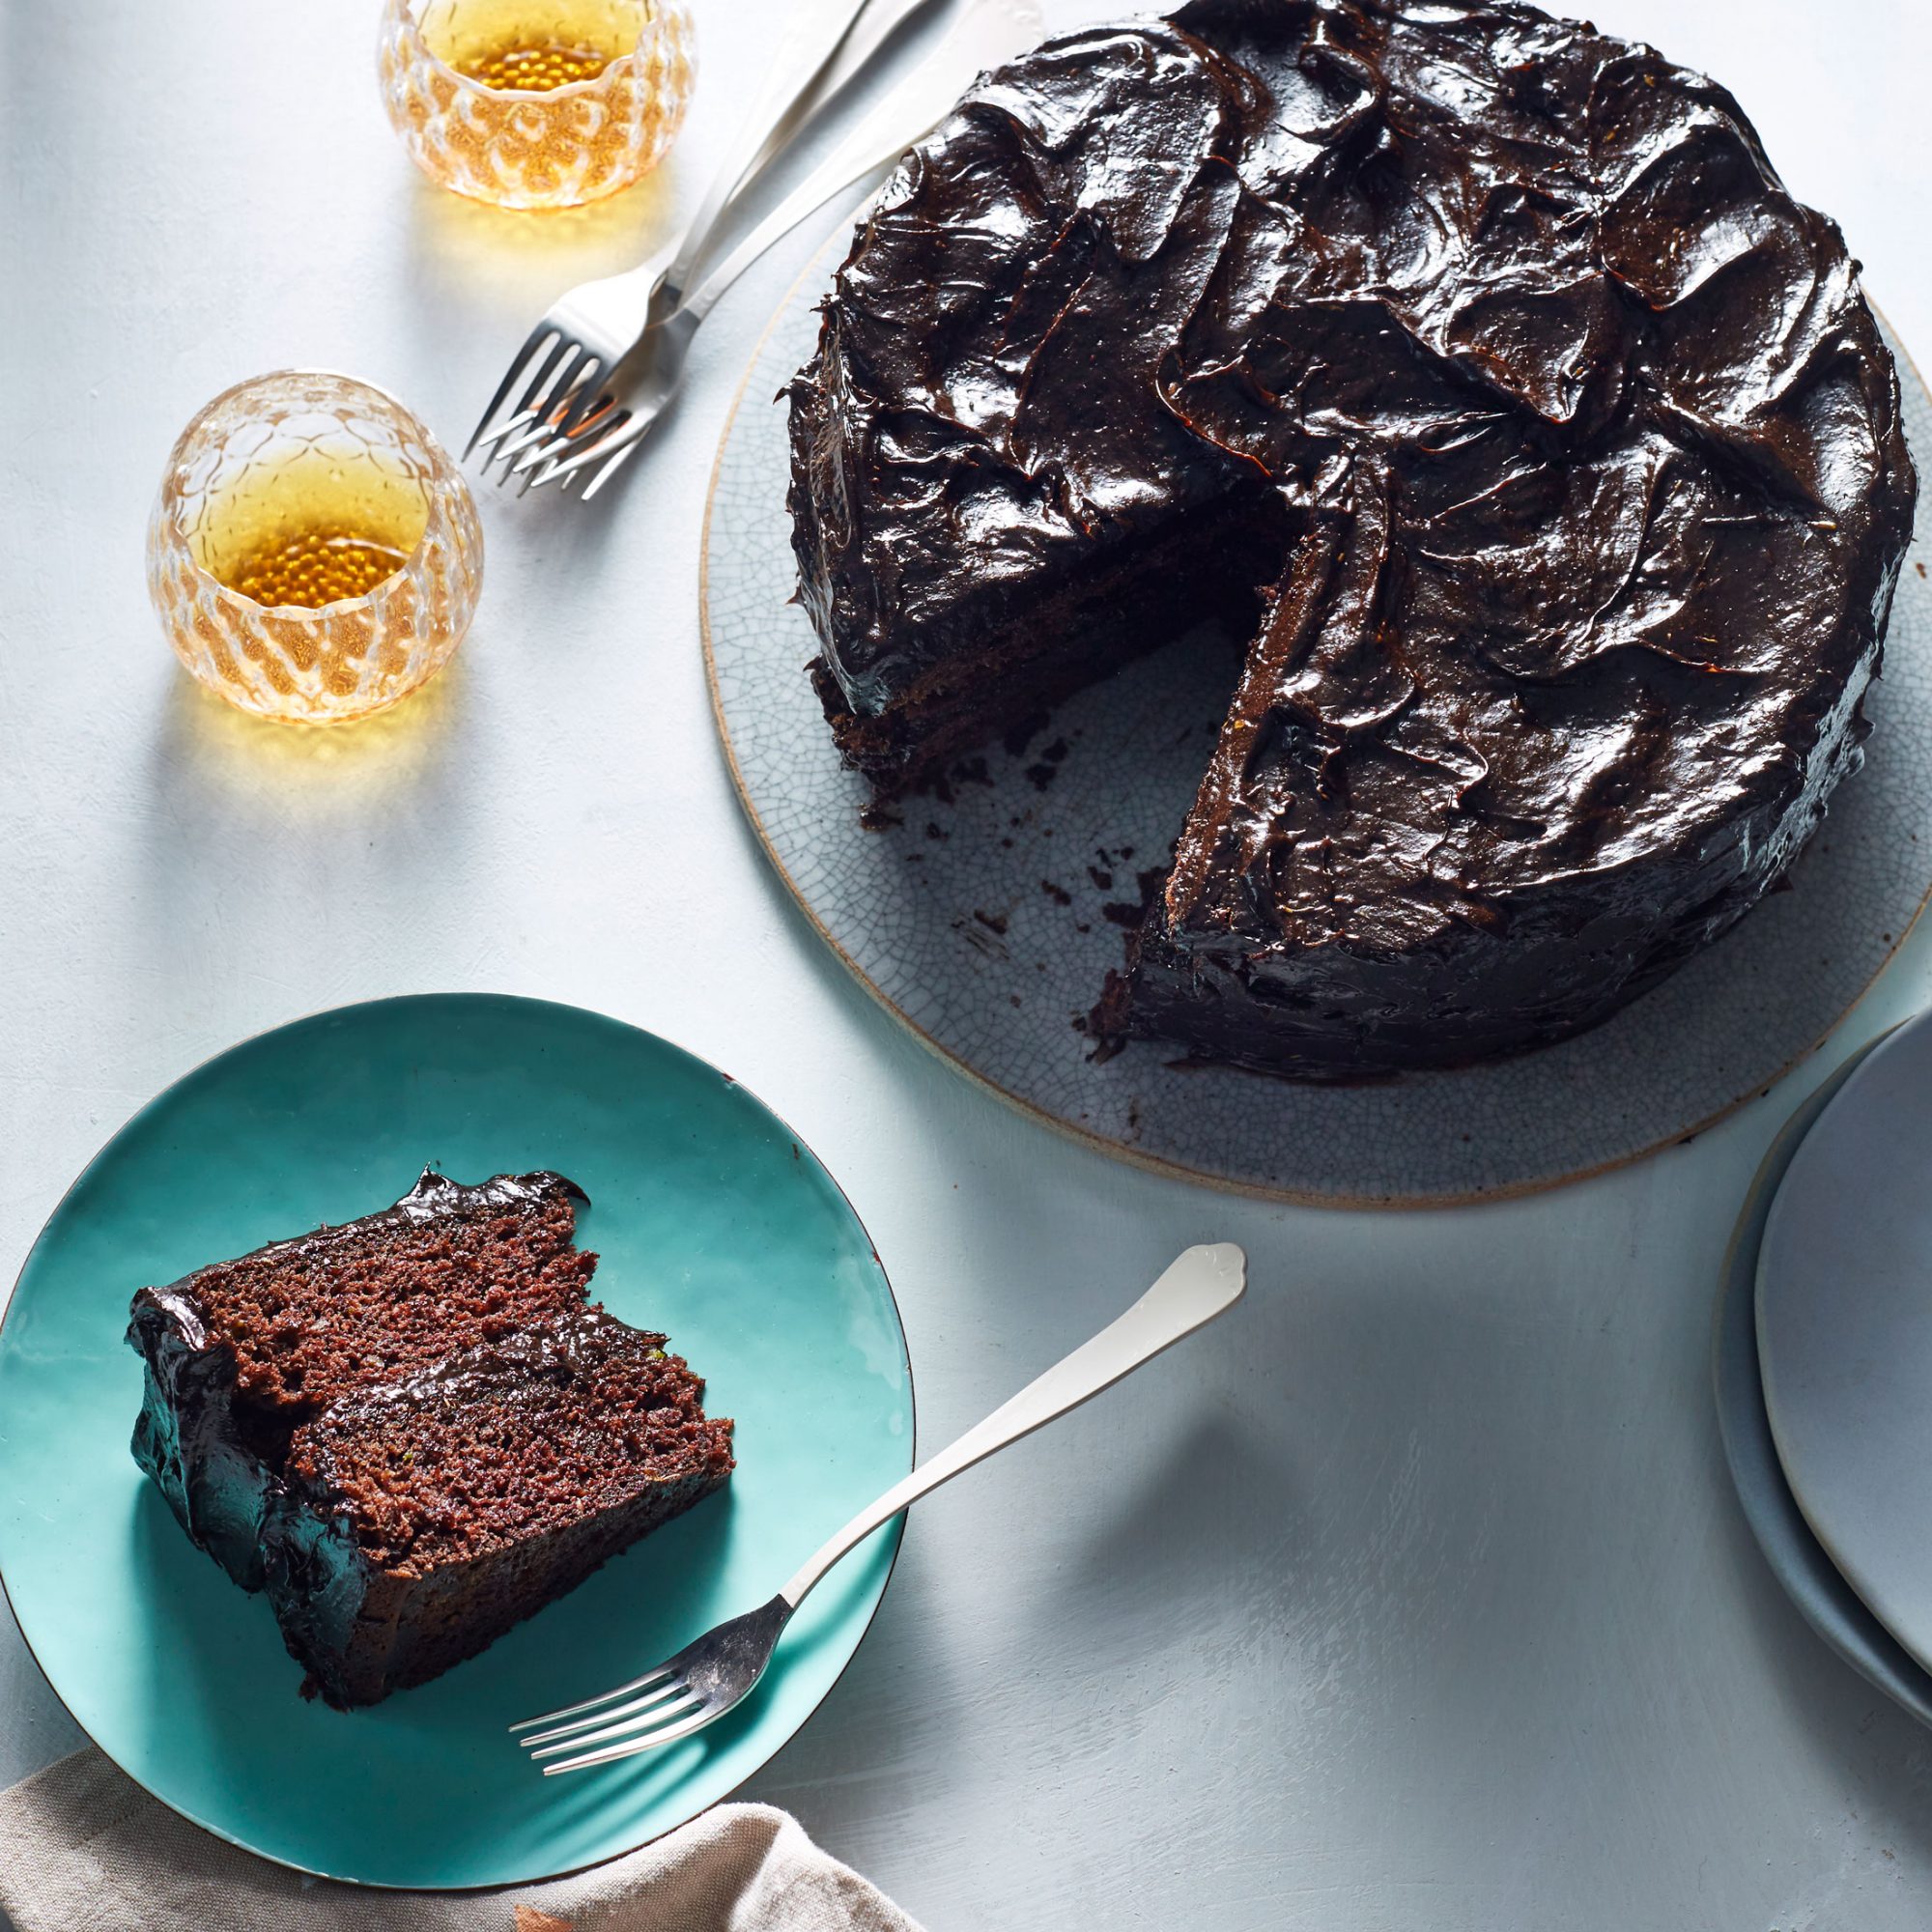 15 Ways to Have Your Chocolate Dark (And Eat It Too)